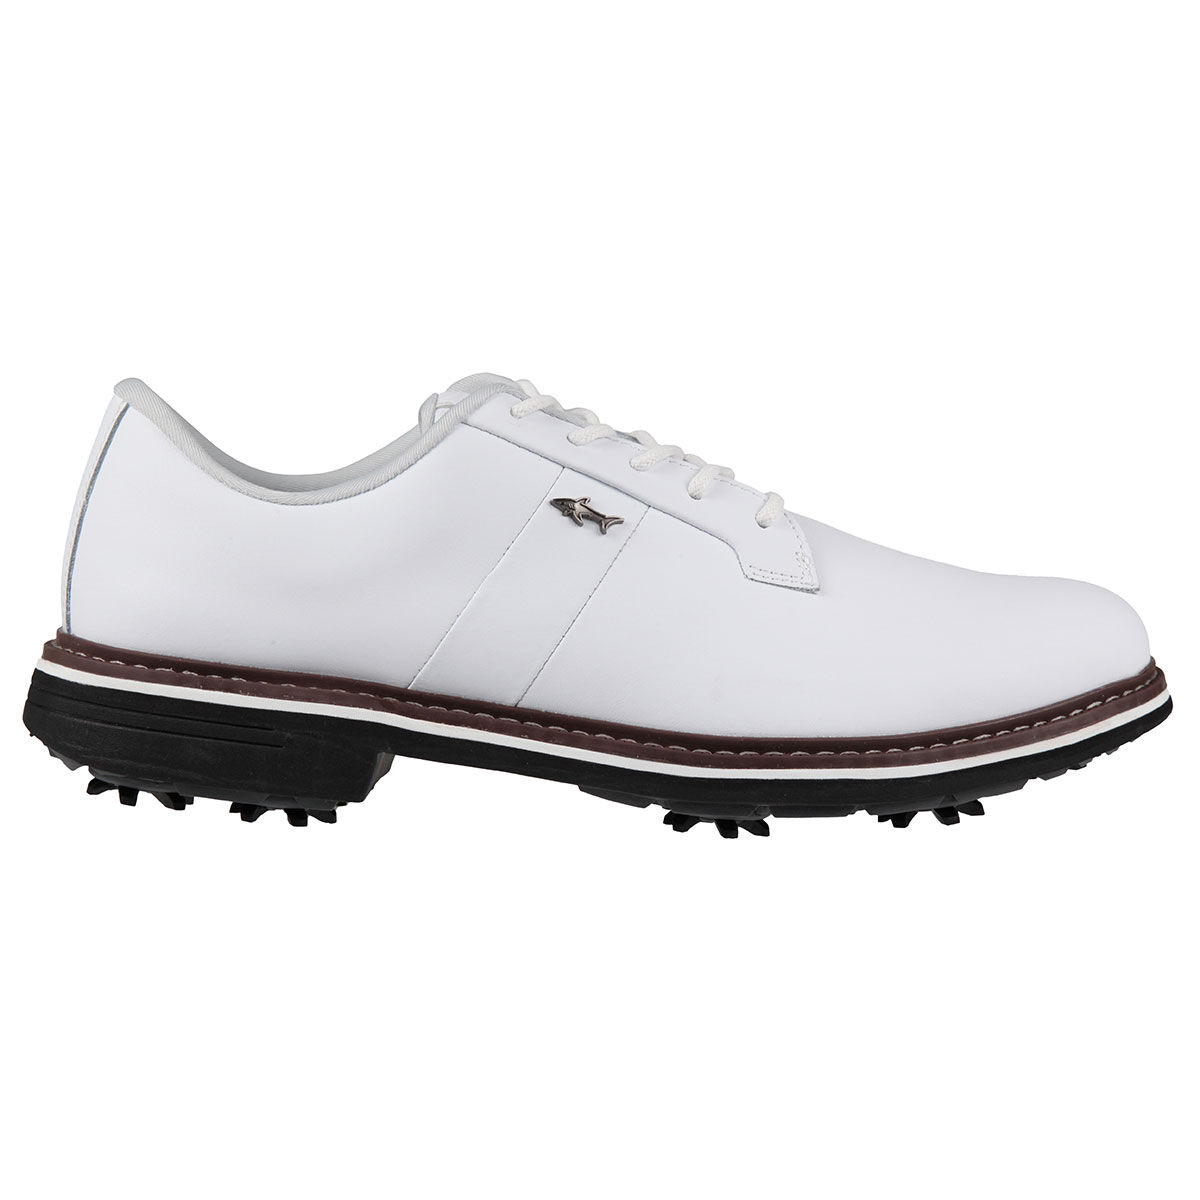 Greg Norman Men’s Isa Tour 2 Waterproof Spiked Golf Shoes, Mens, White, 7 | American Golf